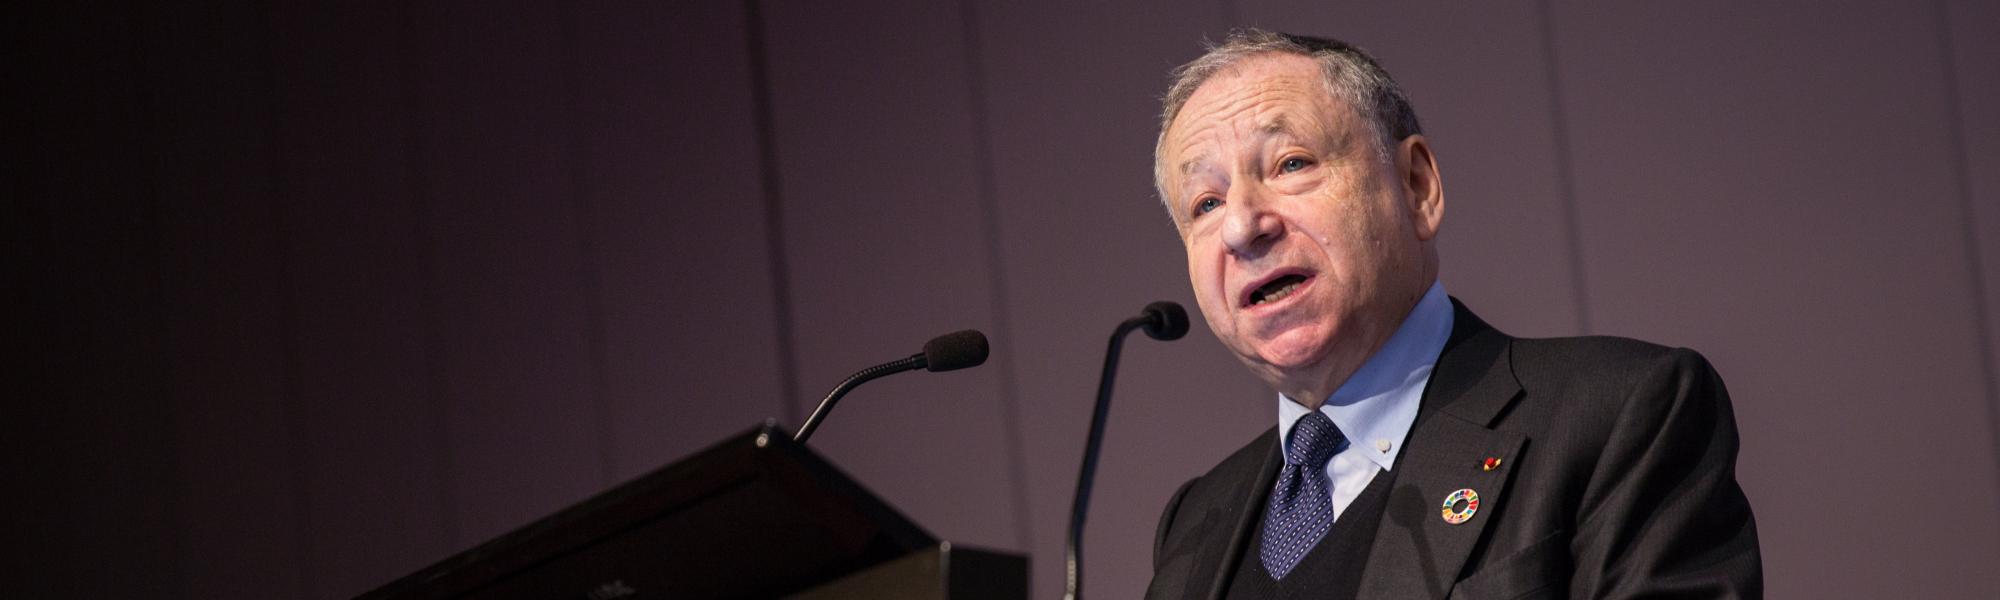 Jean Todt spurs action on road safety at address to IRU members 